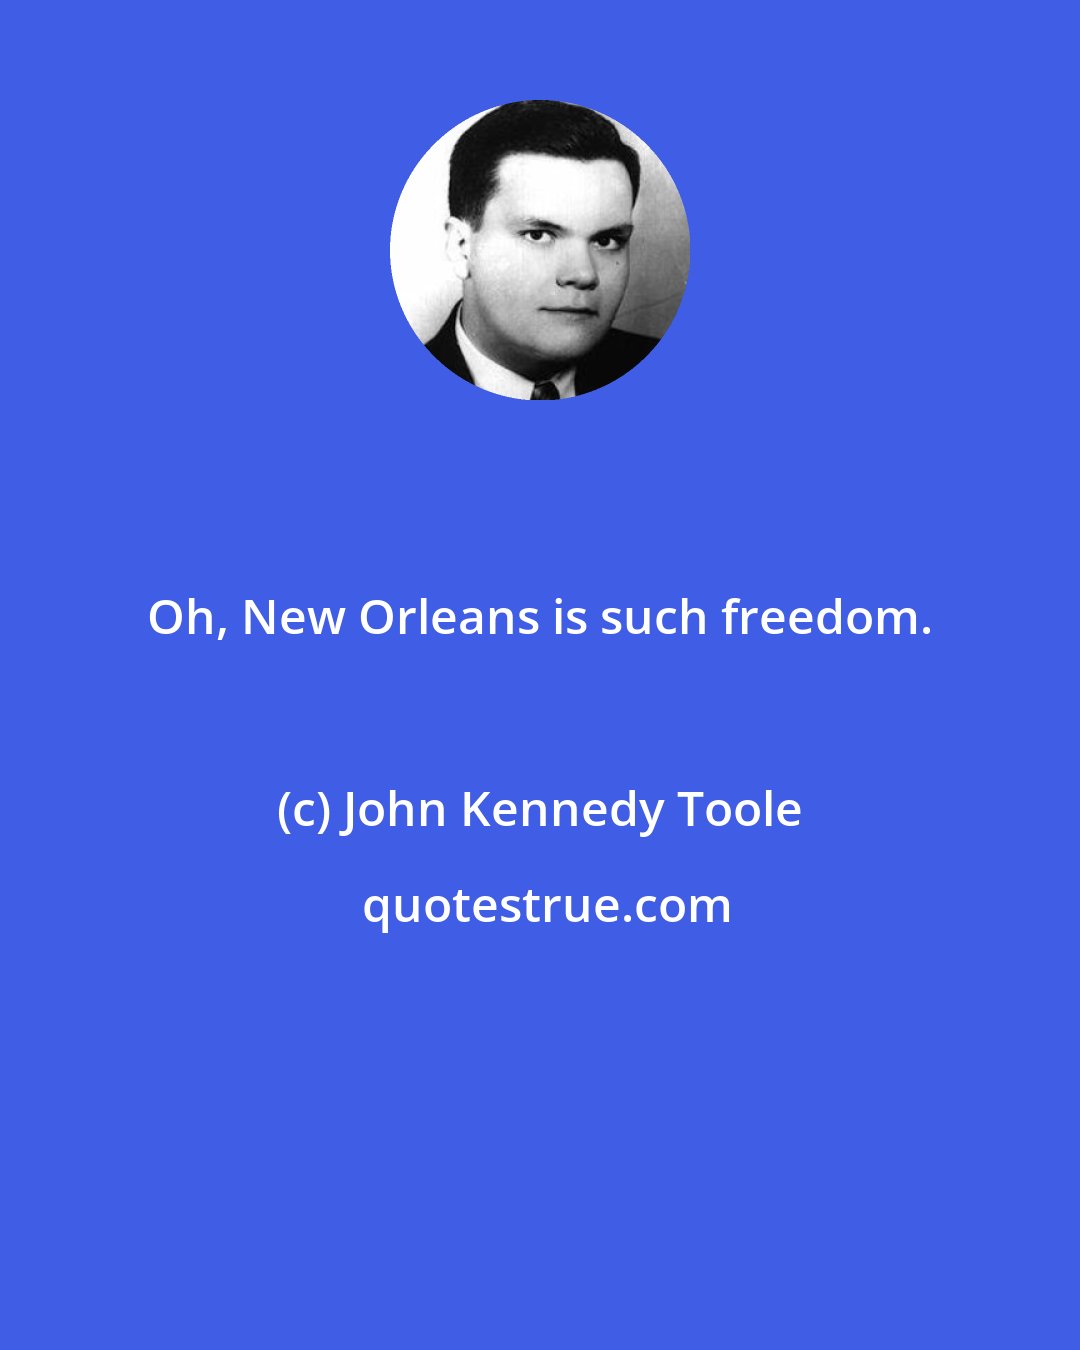 John Kennedy Toole: Oh, New Orleans is such freedom.